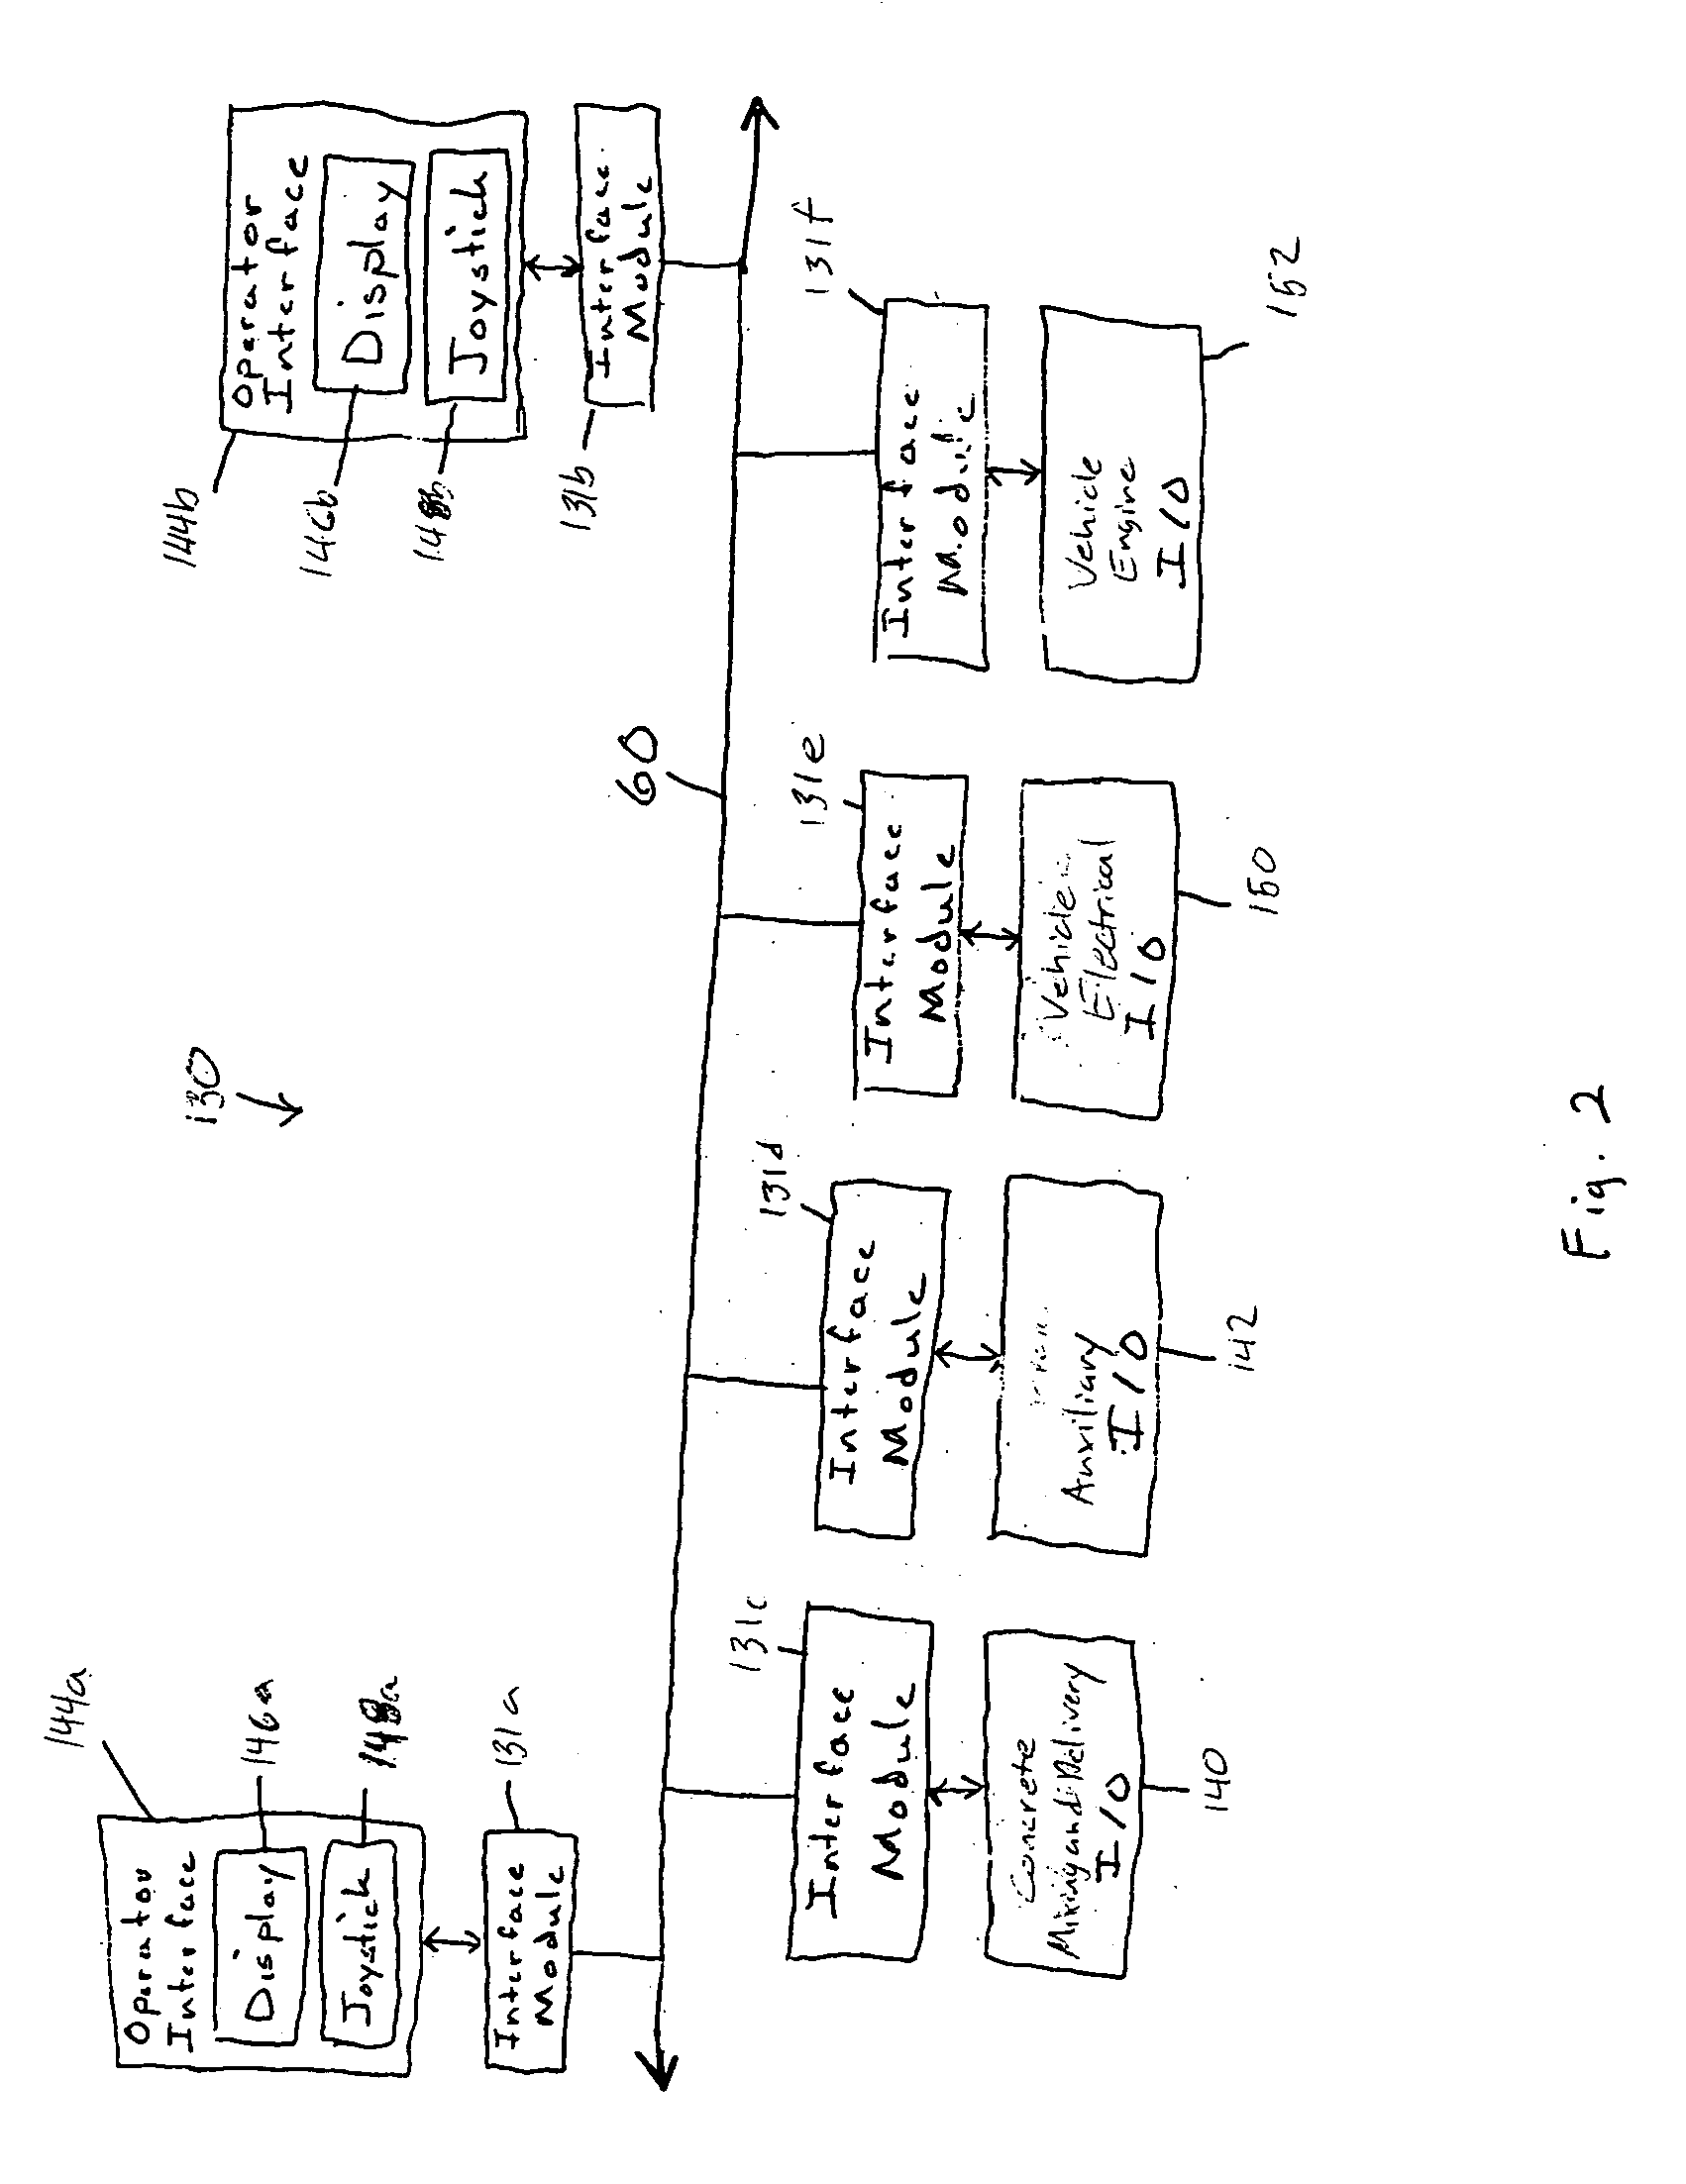 Concrete placement vehicle control system and method